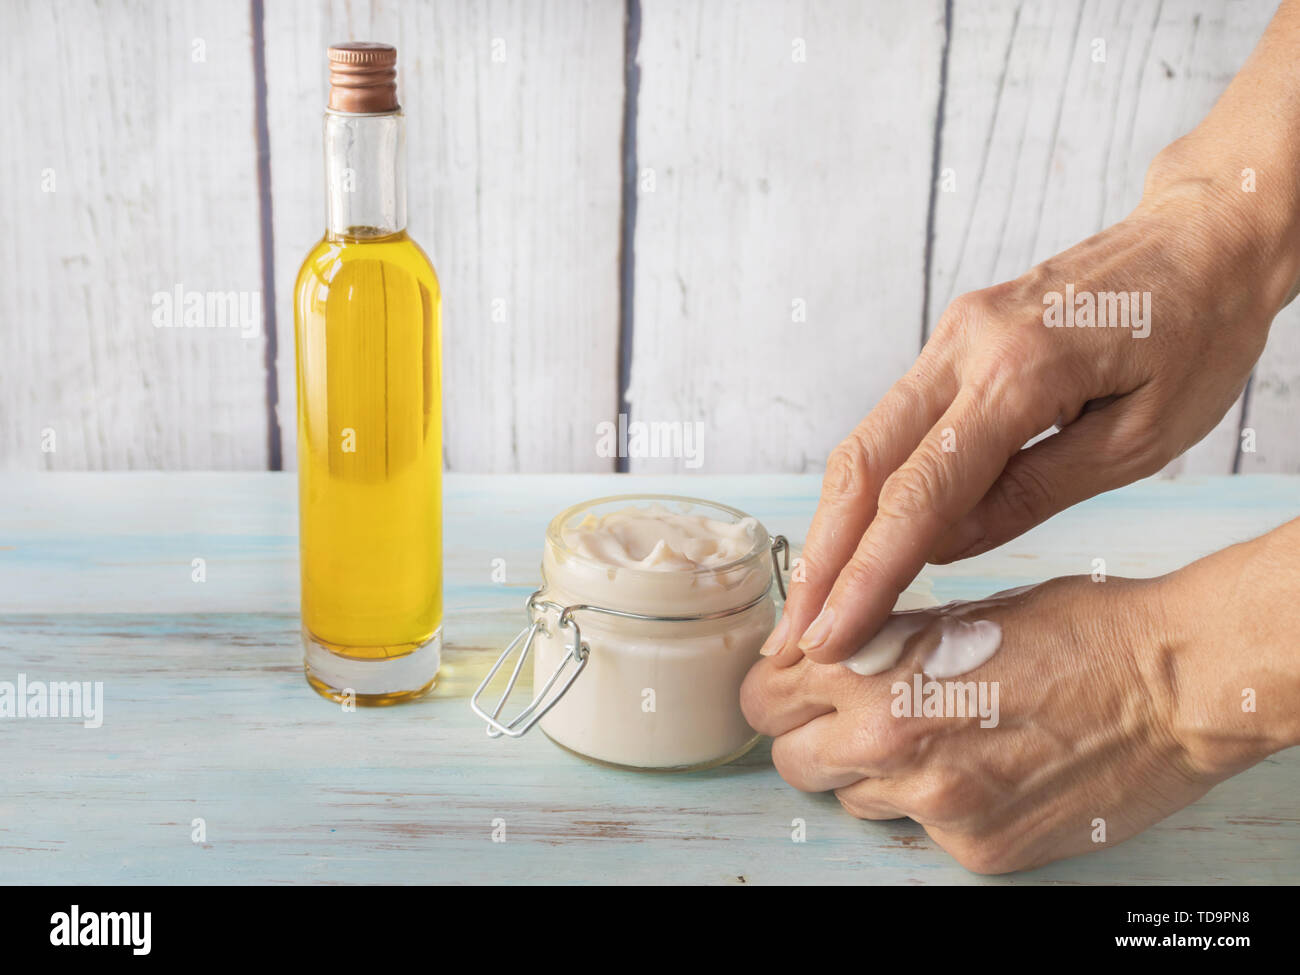 Human hands cracked spreading argan cream. Cream for cracked argan hands in a glass jar. Bottle with argan oil Stock Photo